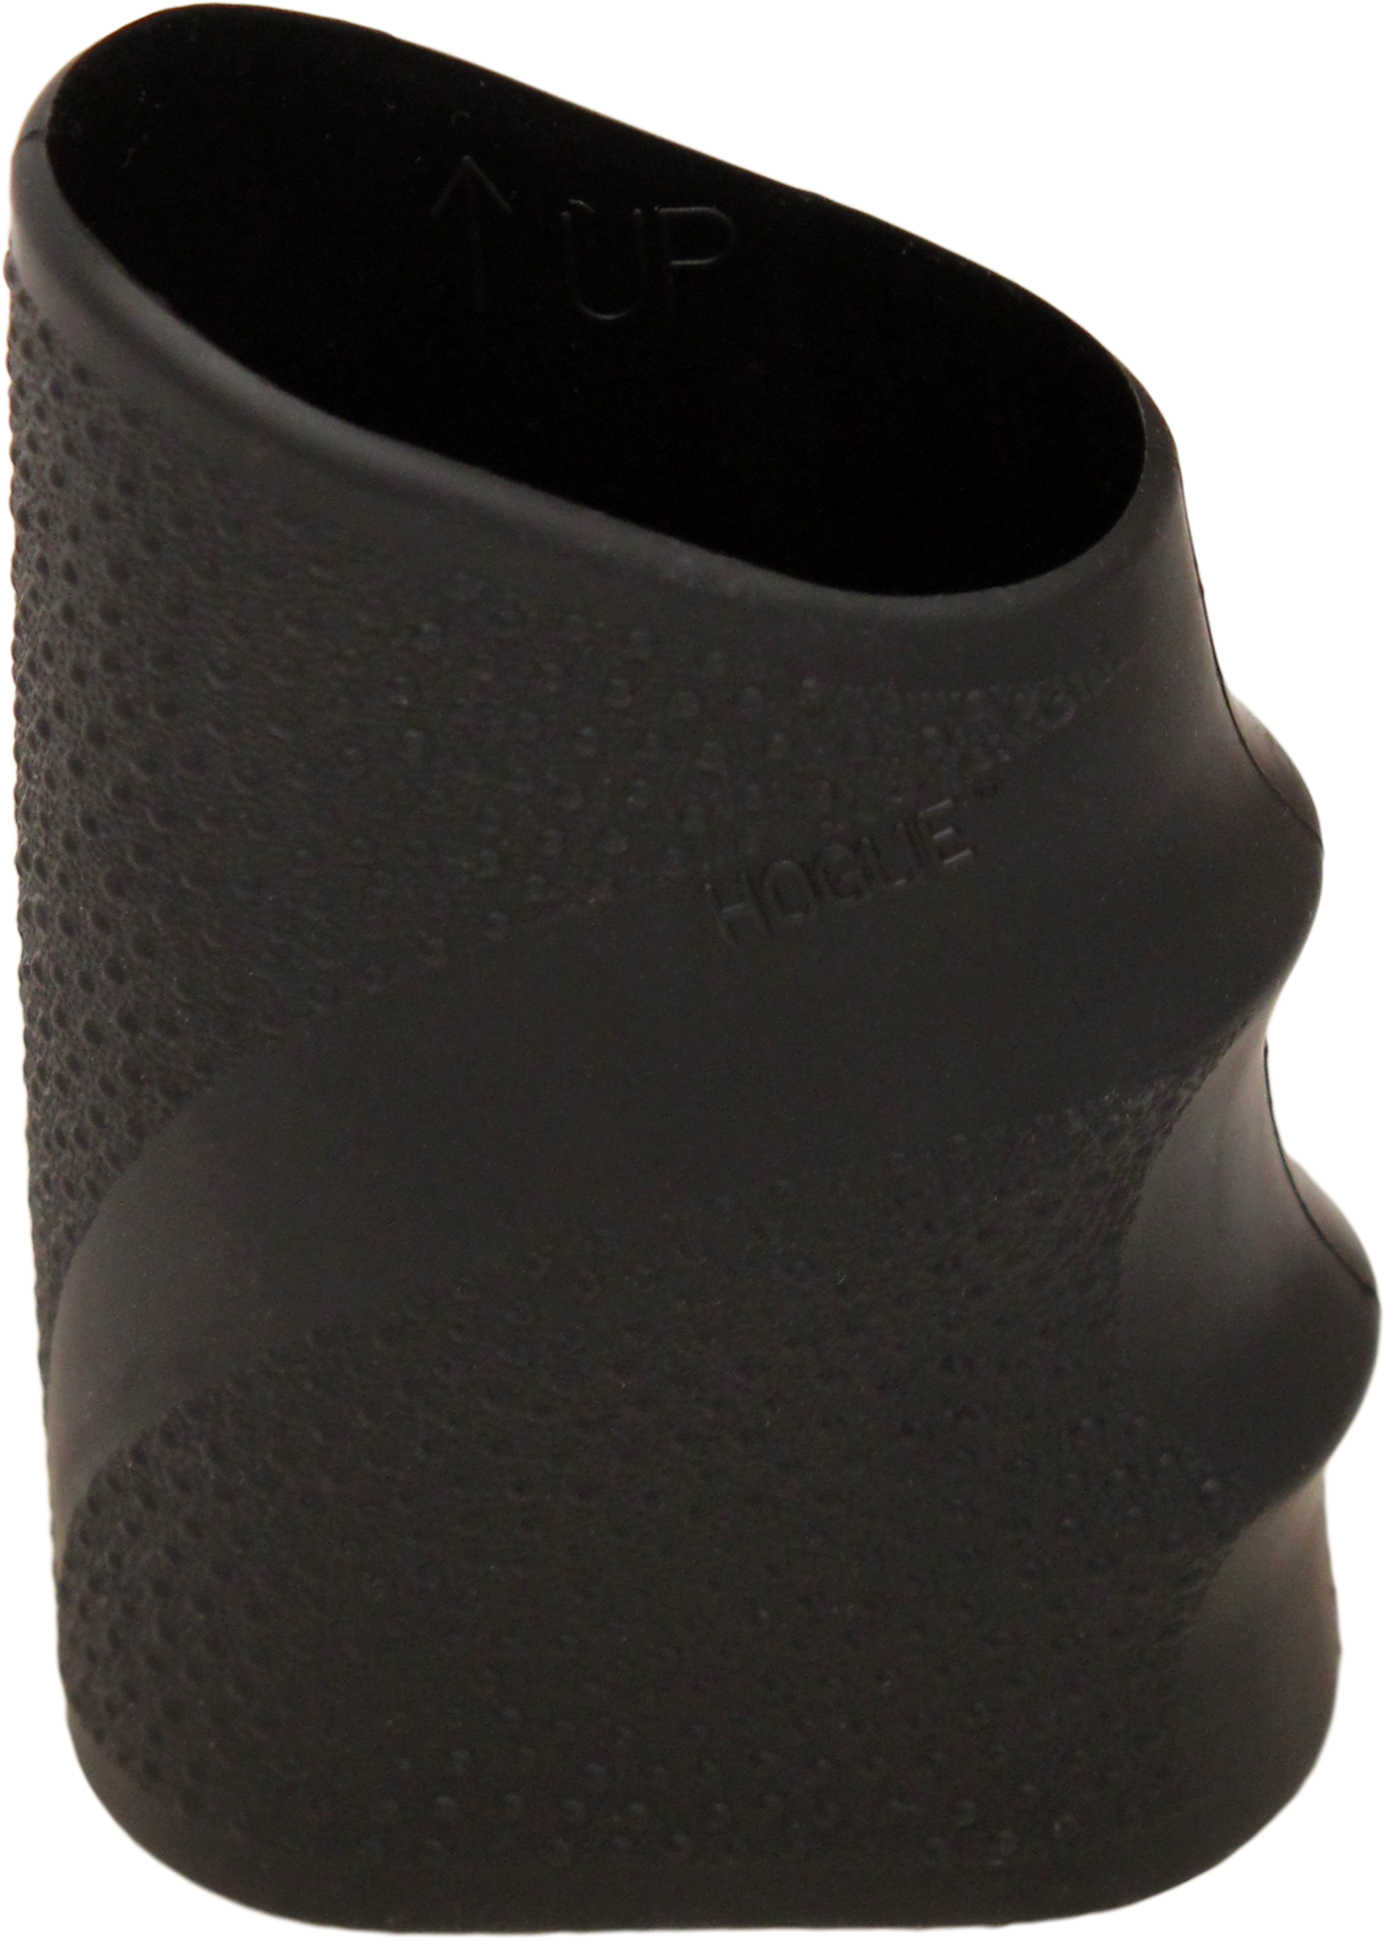 Hogue Handall Grip Sleeve Tactical, Large Black 17210